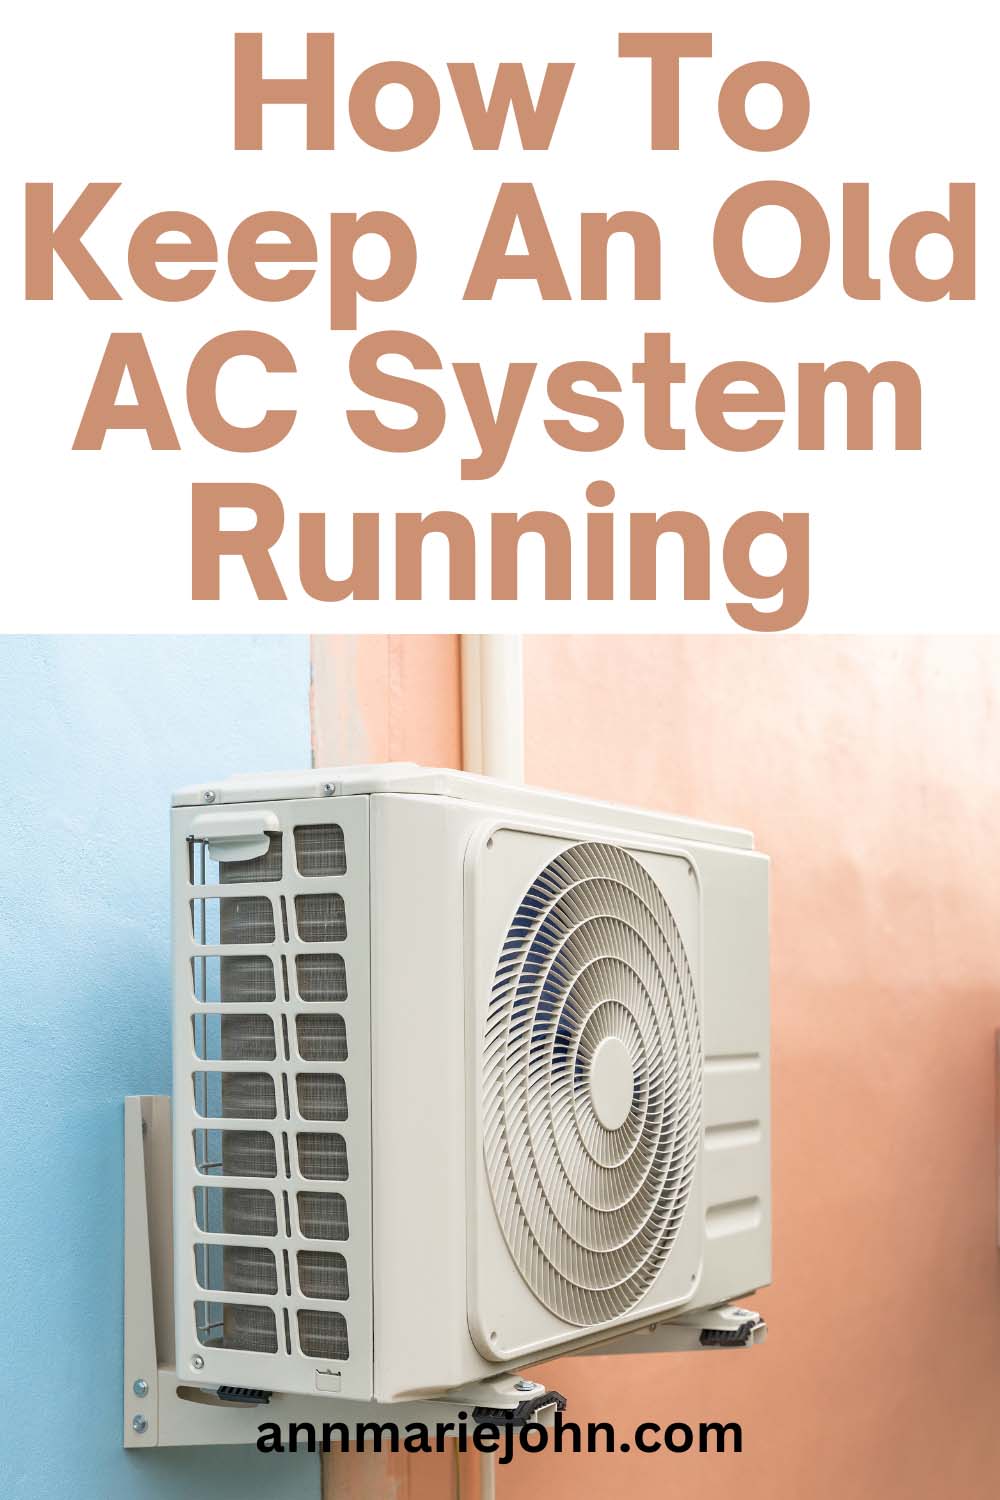 How To Keep An Old AC System Running